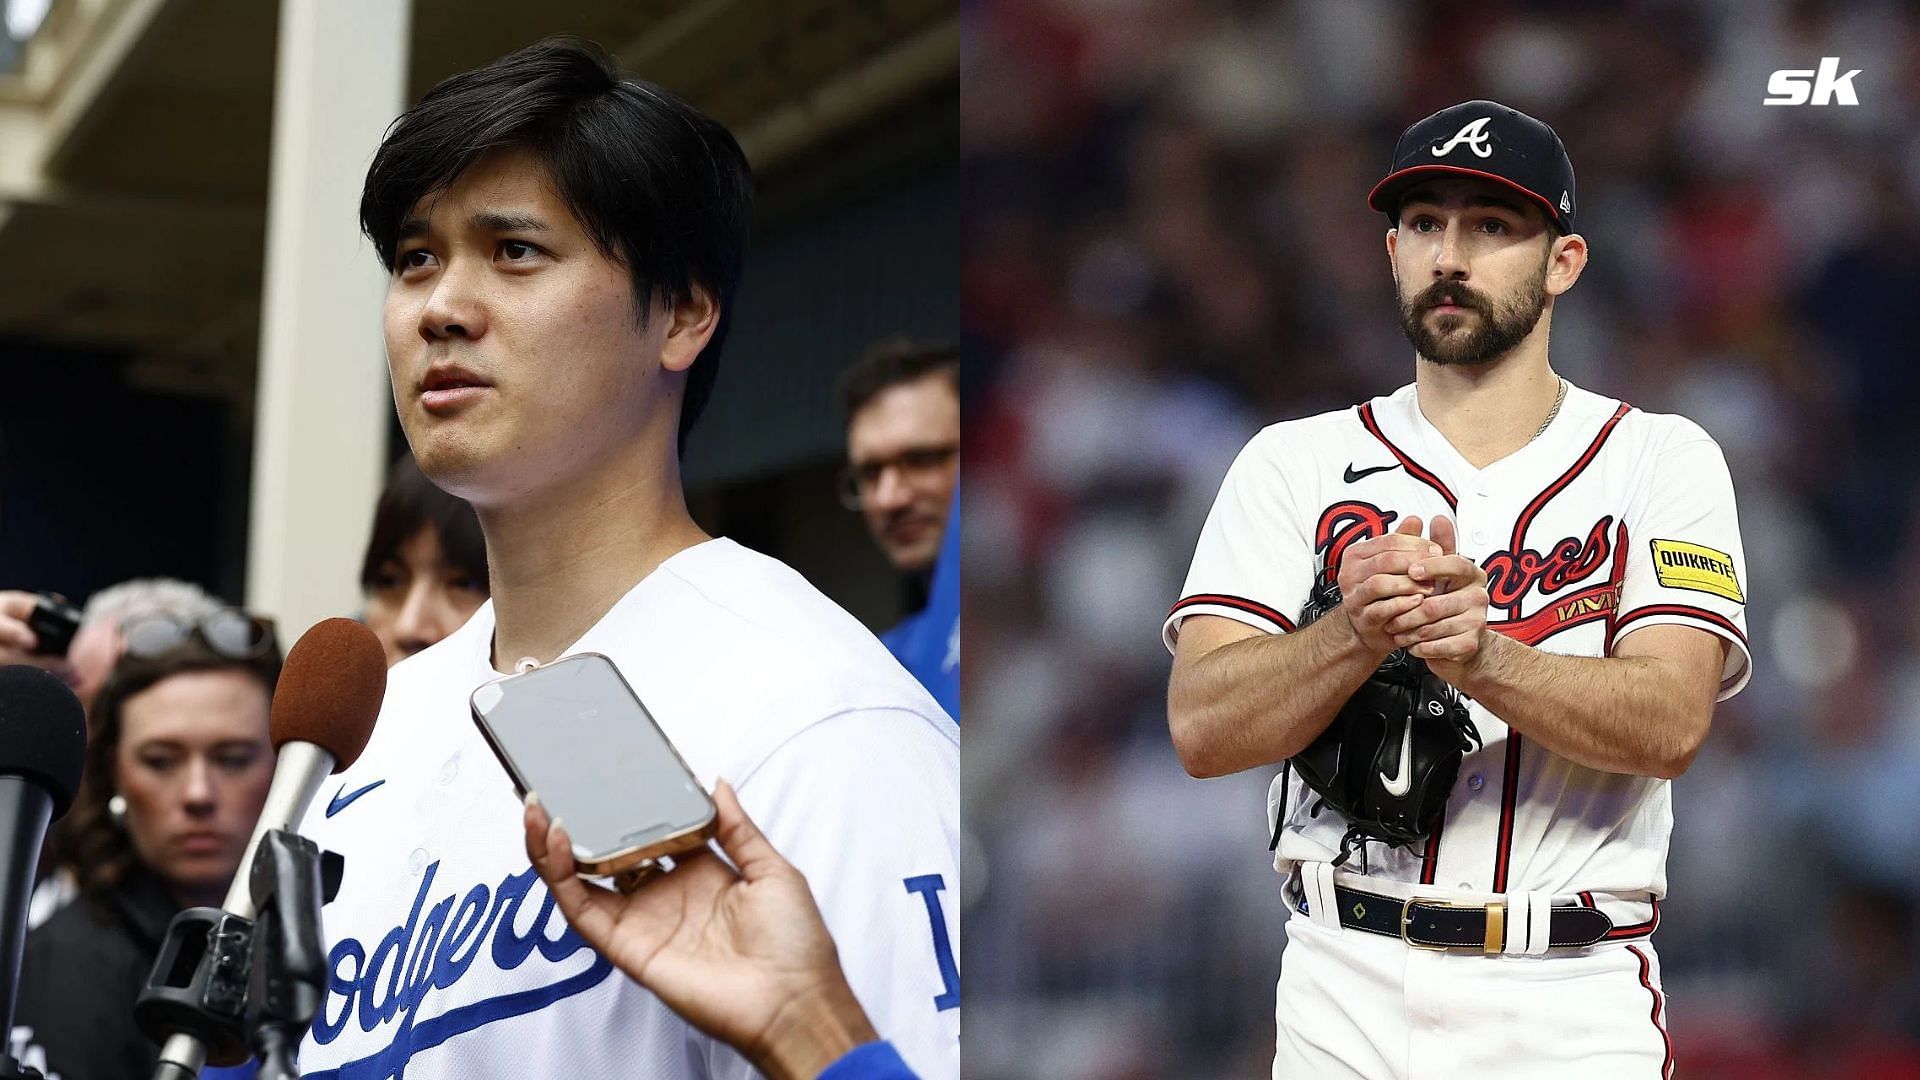 MLB News Today: Shohei Ohtani announces marriage; Paul Skenes and Jackson Holliday square off; Spencer Strider continues Spring Training dominance